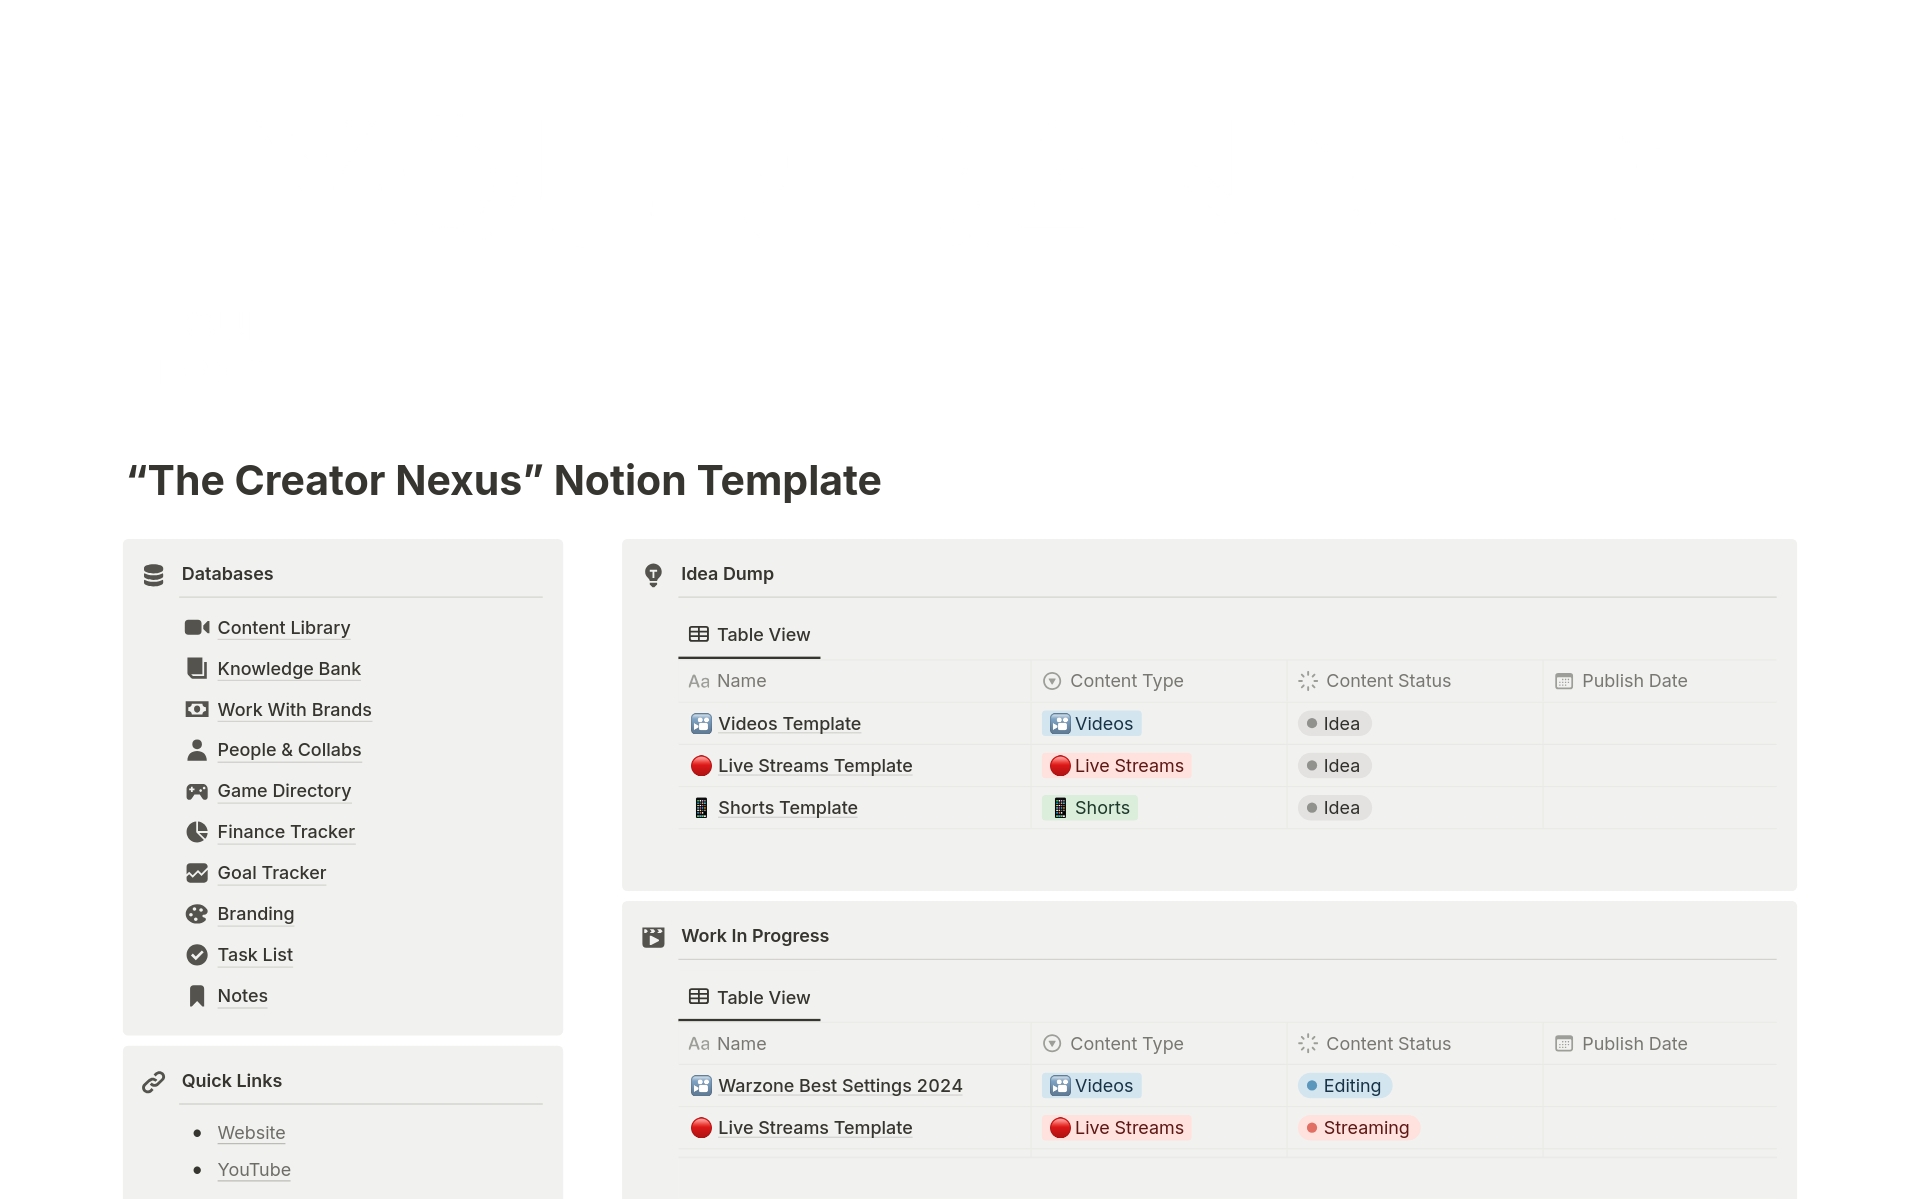 "The Creator Nexus" Notion Template simplifies the creative workflow for content creators. Instead of rushing to produce more content or posting everywhere, it encourages you to create an organized system.